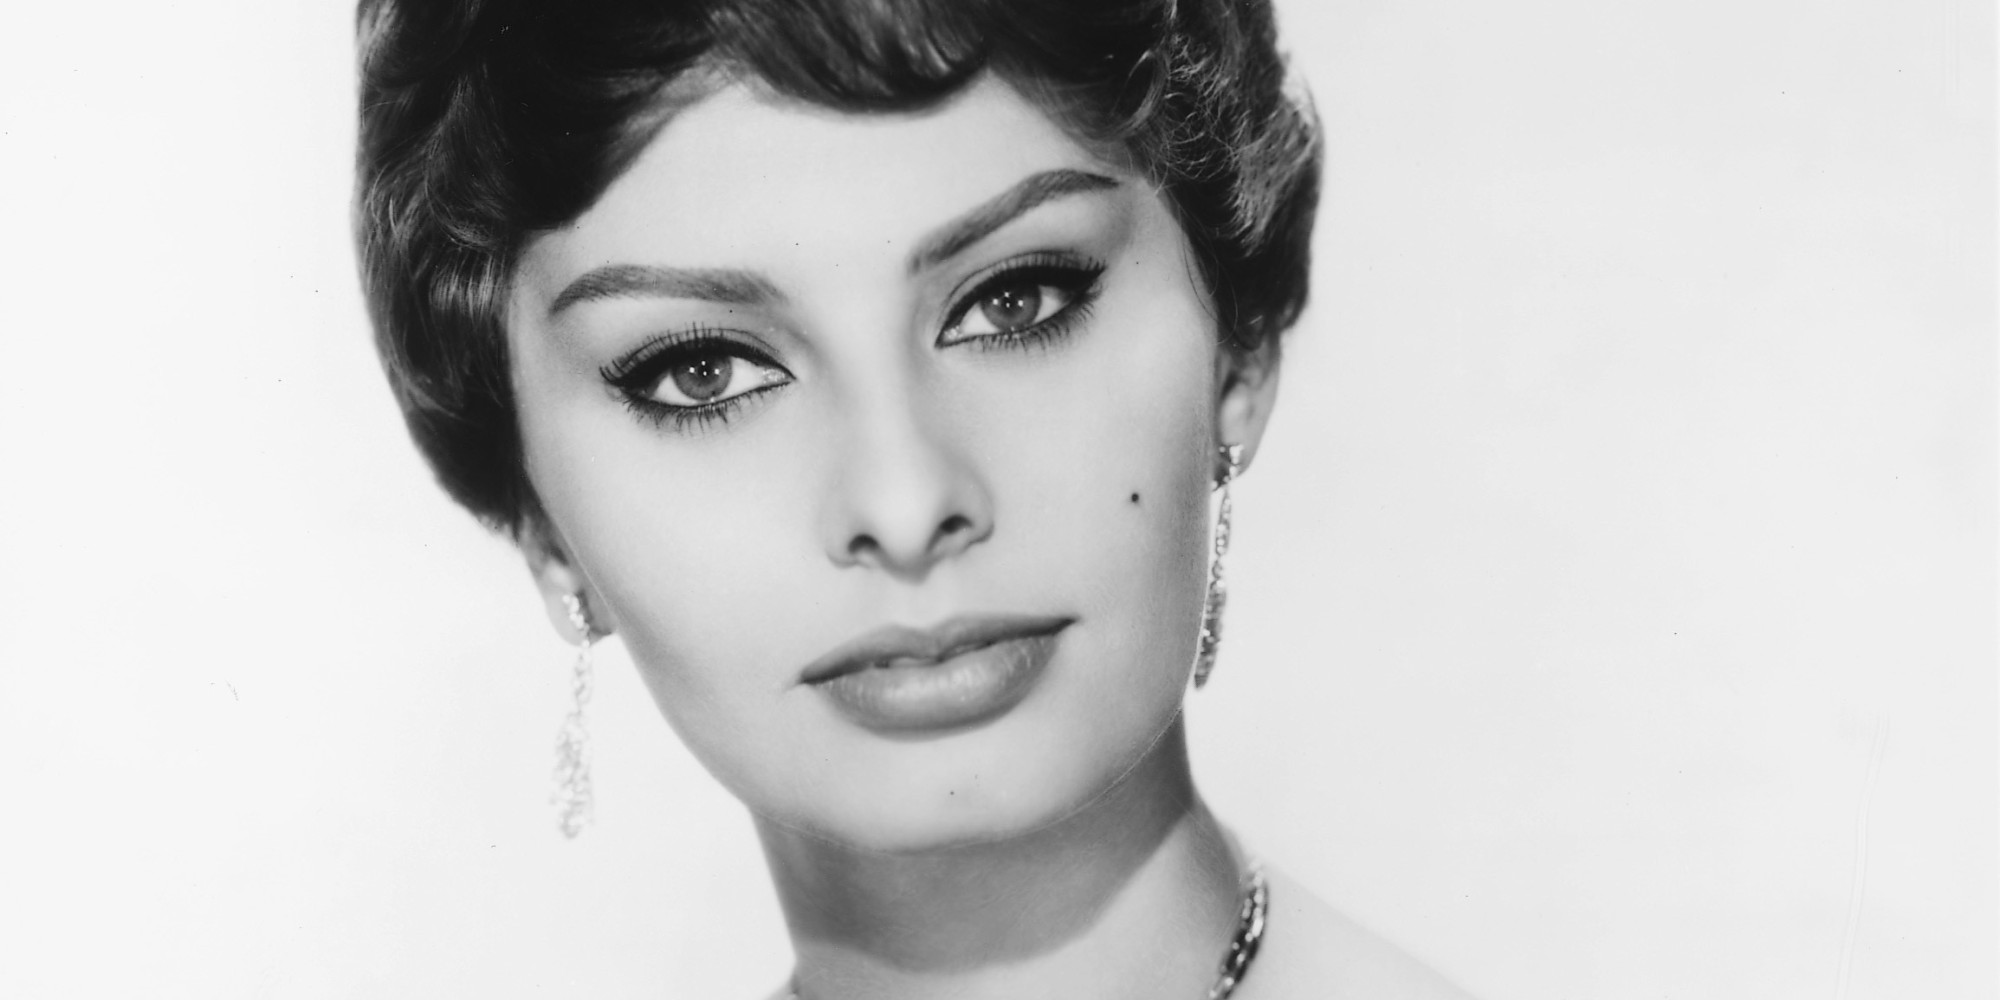 Headshot of Sophia Loren, Italian actress, looking glamorous, wearing a shoulderless dress and a diamond necklace and diamond earrings in a studio portrait, against a white background, circa 1950. (Photo by Silver Screen Collection/Getty Images)